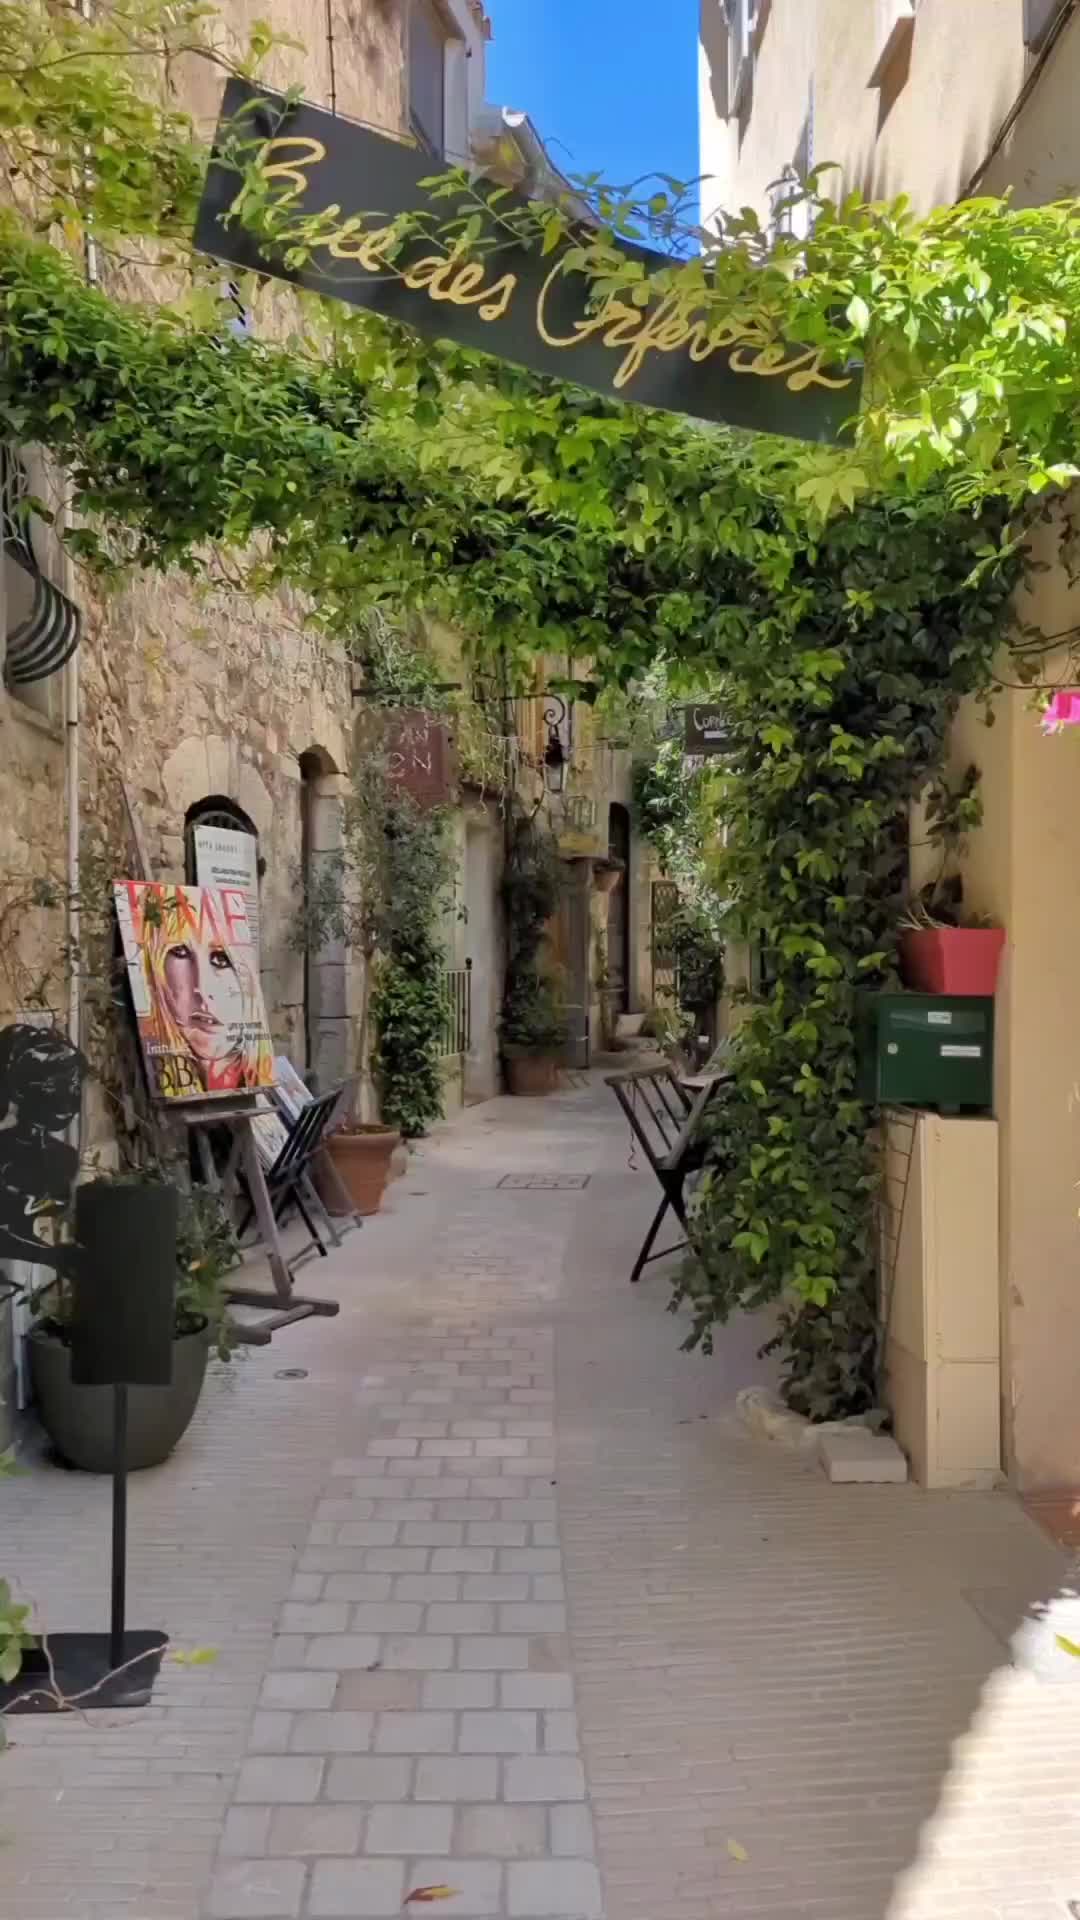 Explore Mougins: A Gem of the French Riviera